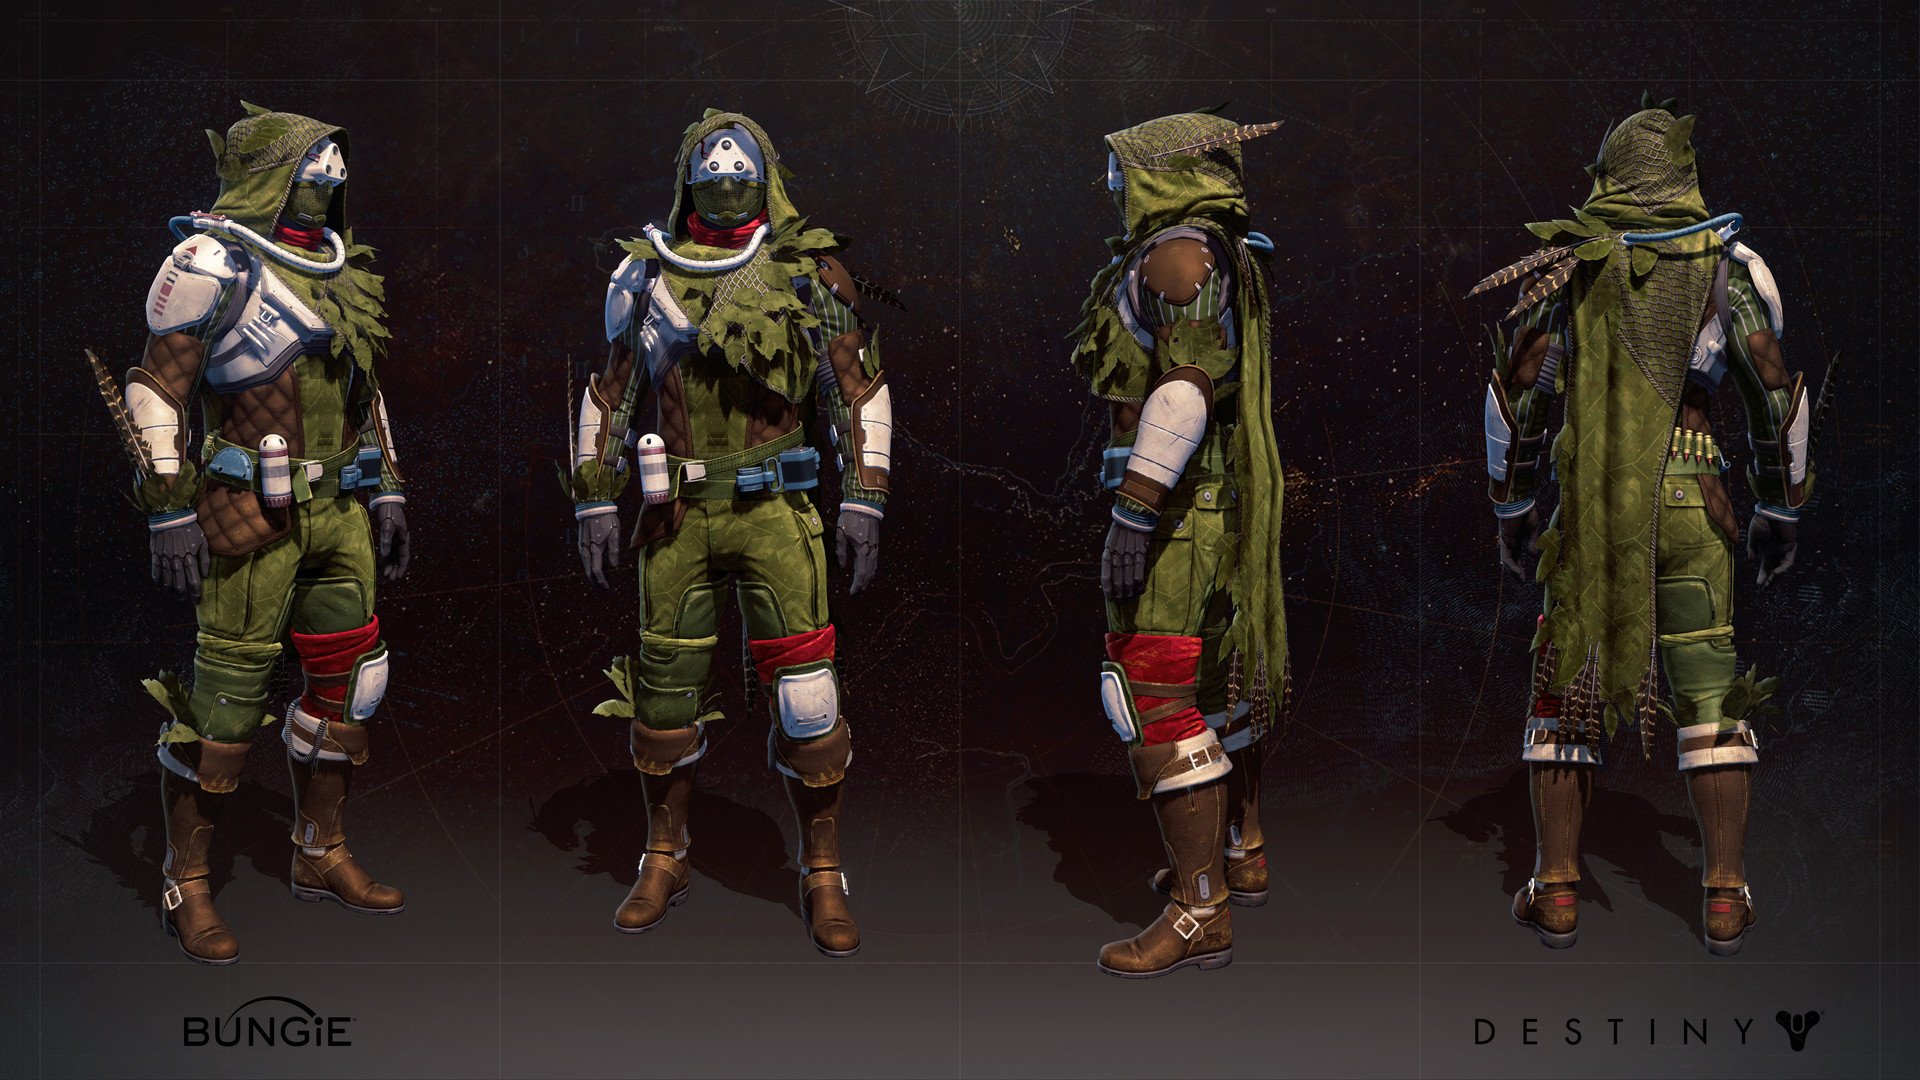 Gallery of Destiny 2 Coolest Armour.